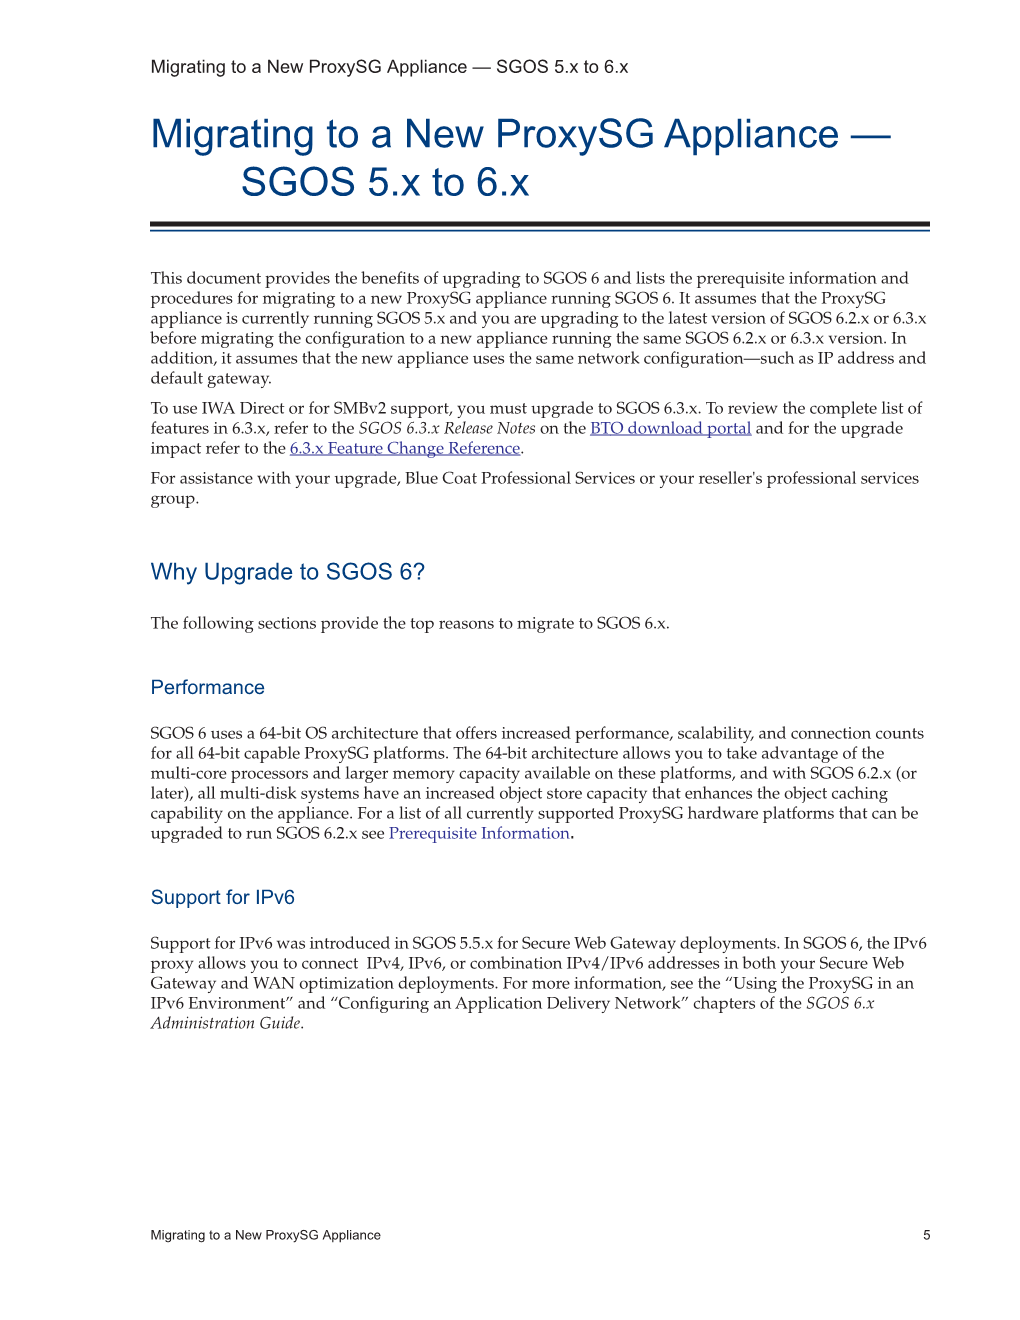 Migrating to a New Proxysg Appliance — SGOS 5.X to 6.X Migrating to a New Proxysg Appliance — SGOS 5.X to 6.X